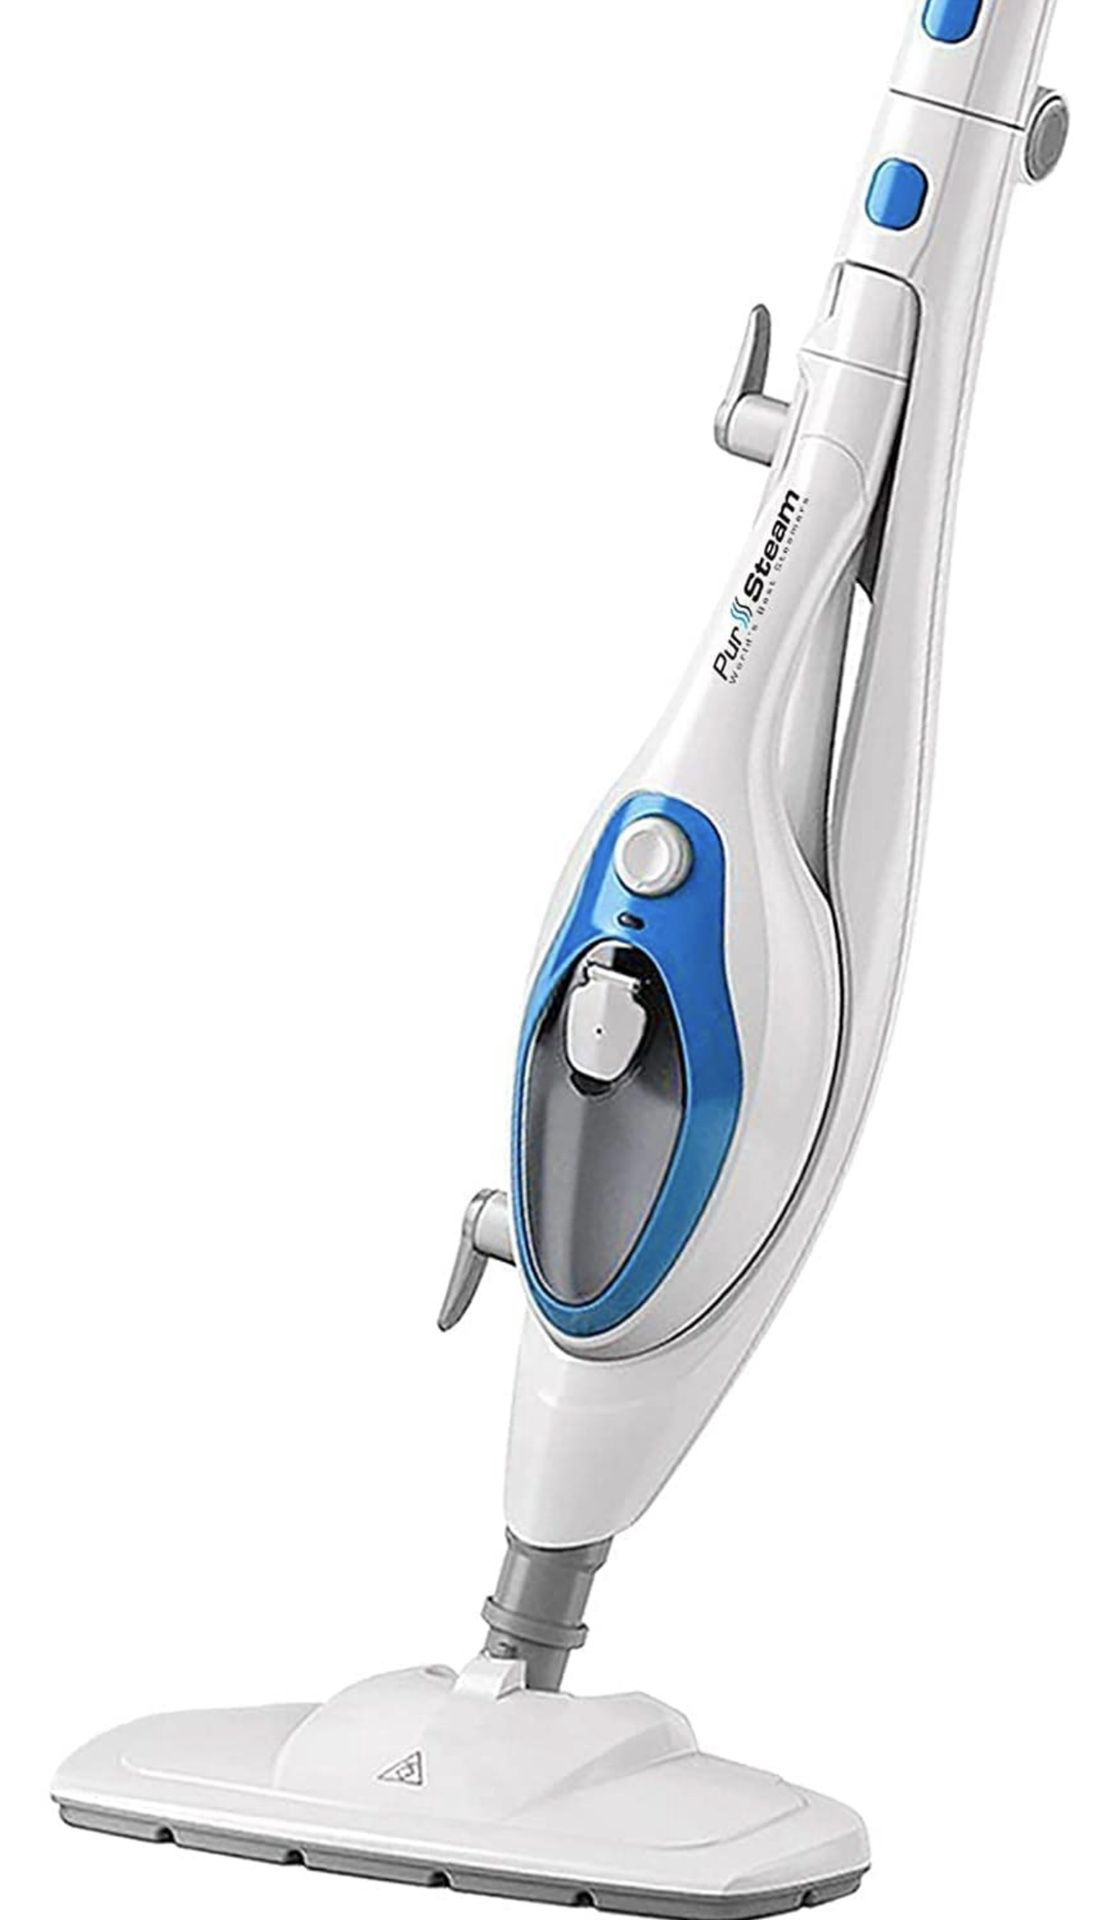 New PurSteam Steam Mop Cleaner 10-in-1 with Convenient Detachable Handheld Unit